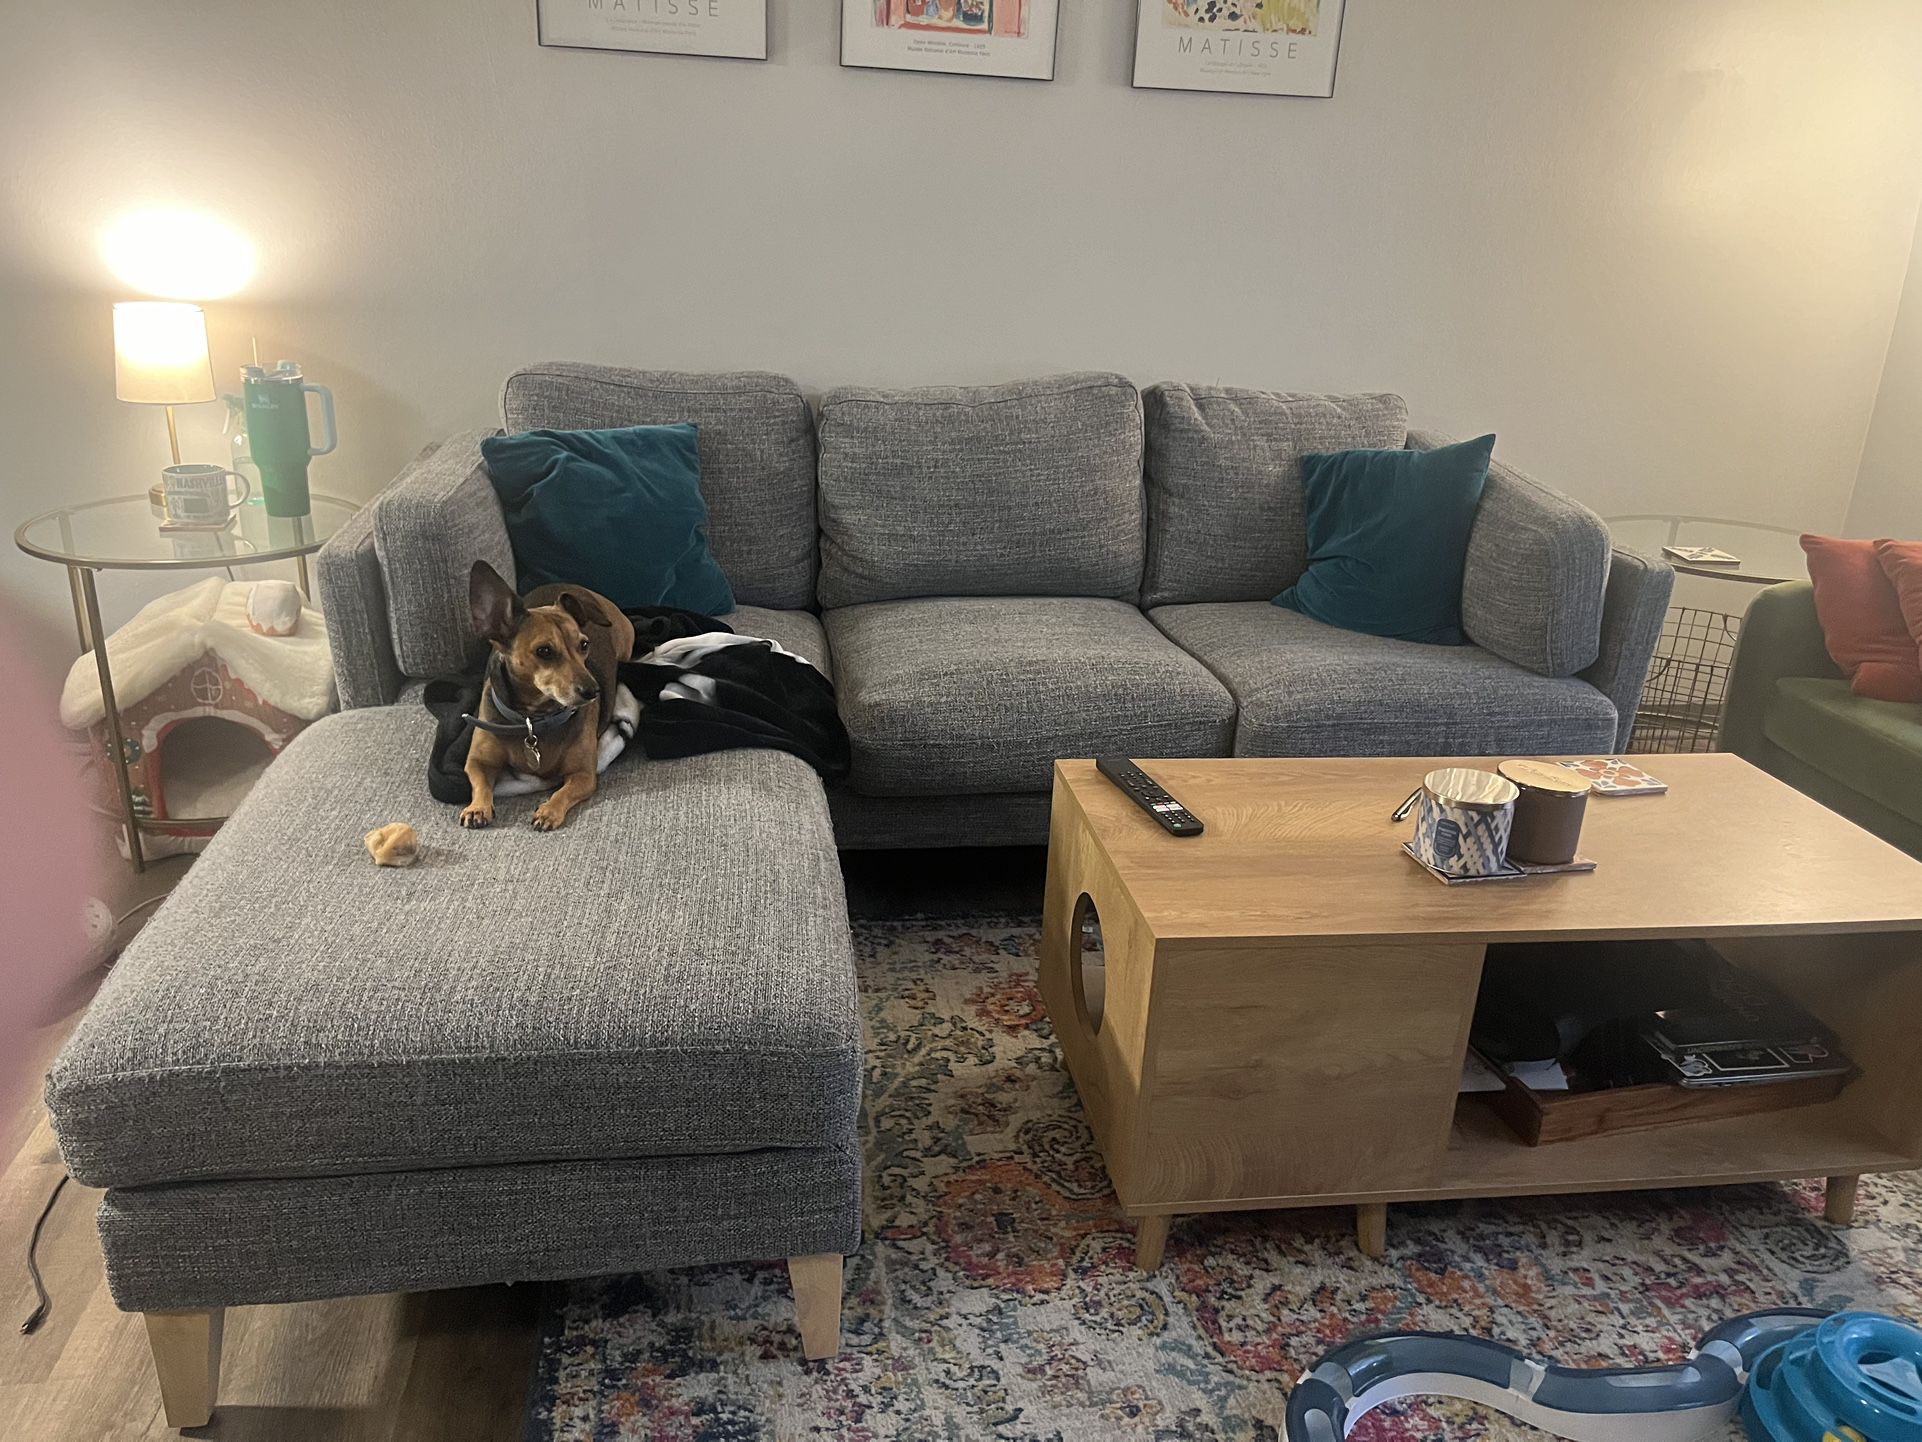 World Market Couch (Dog Not Included)